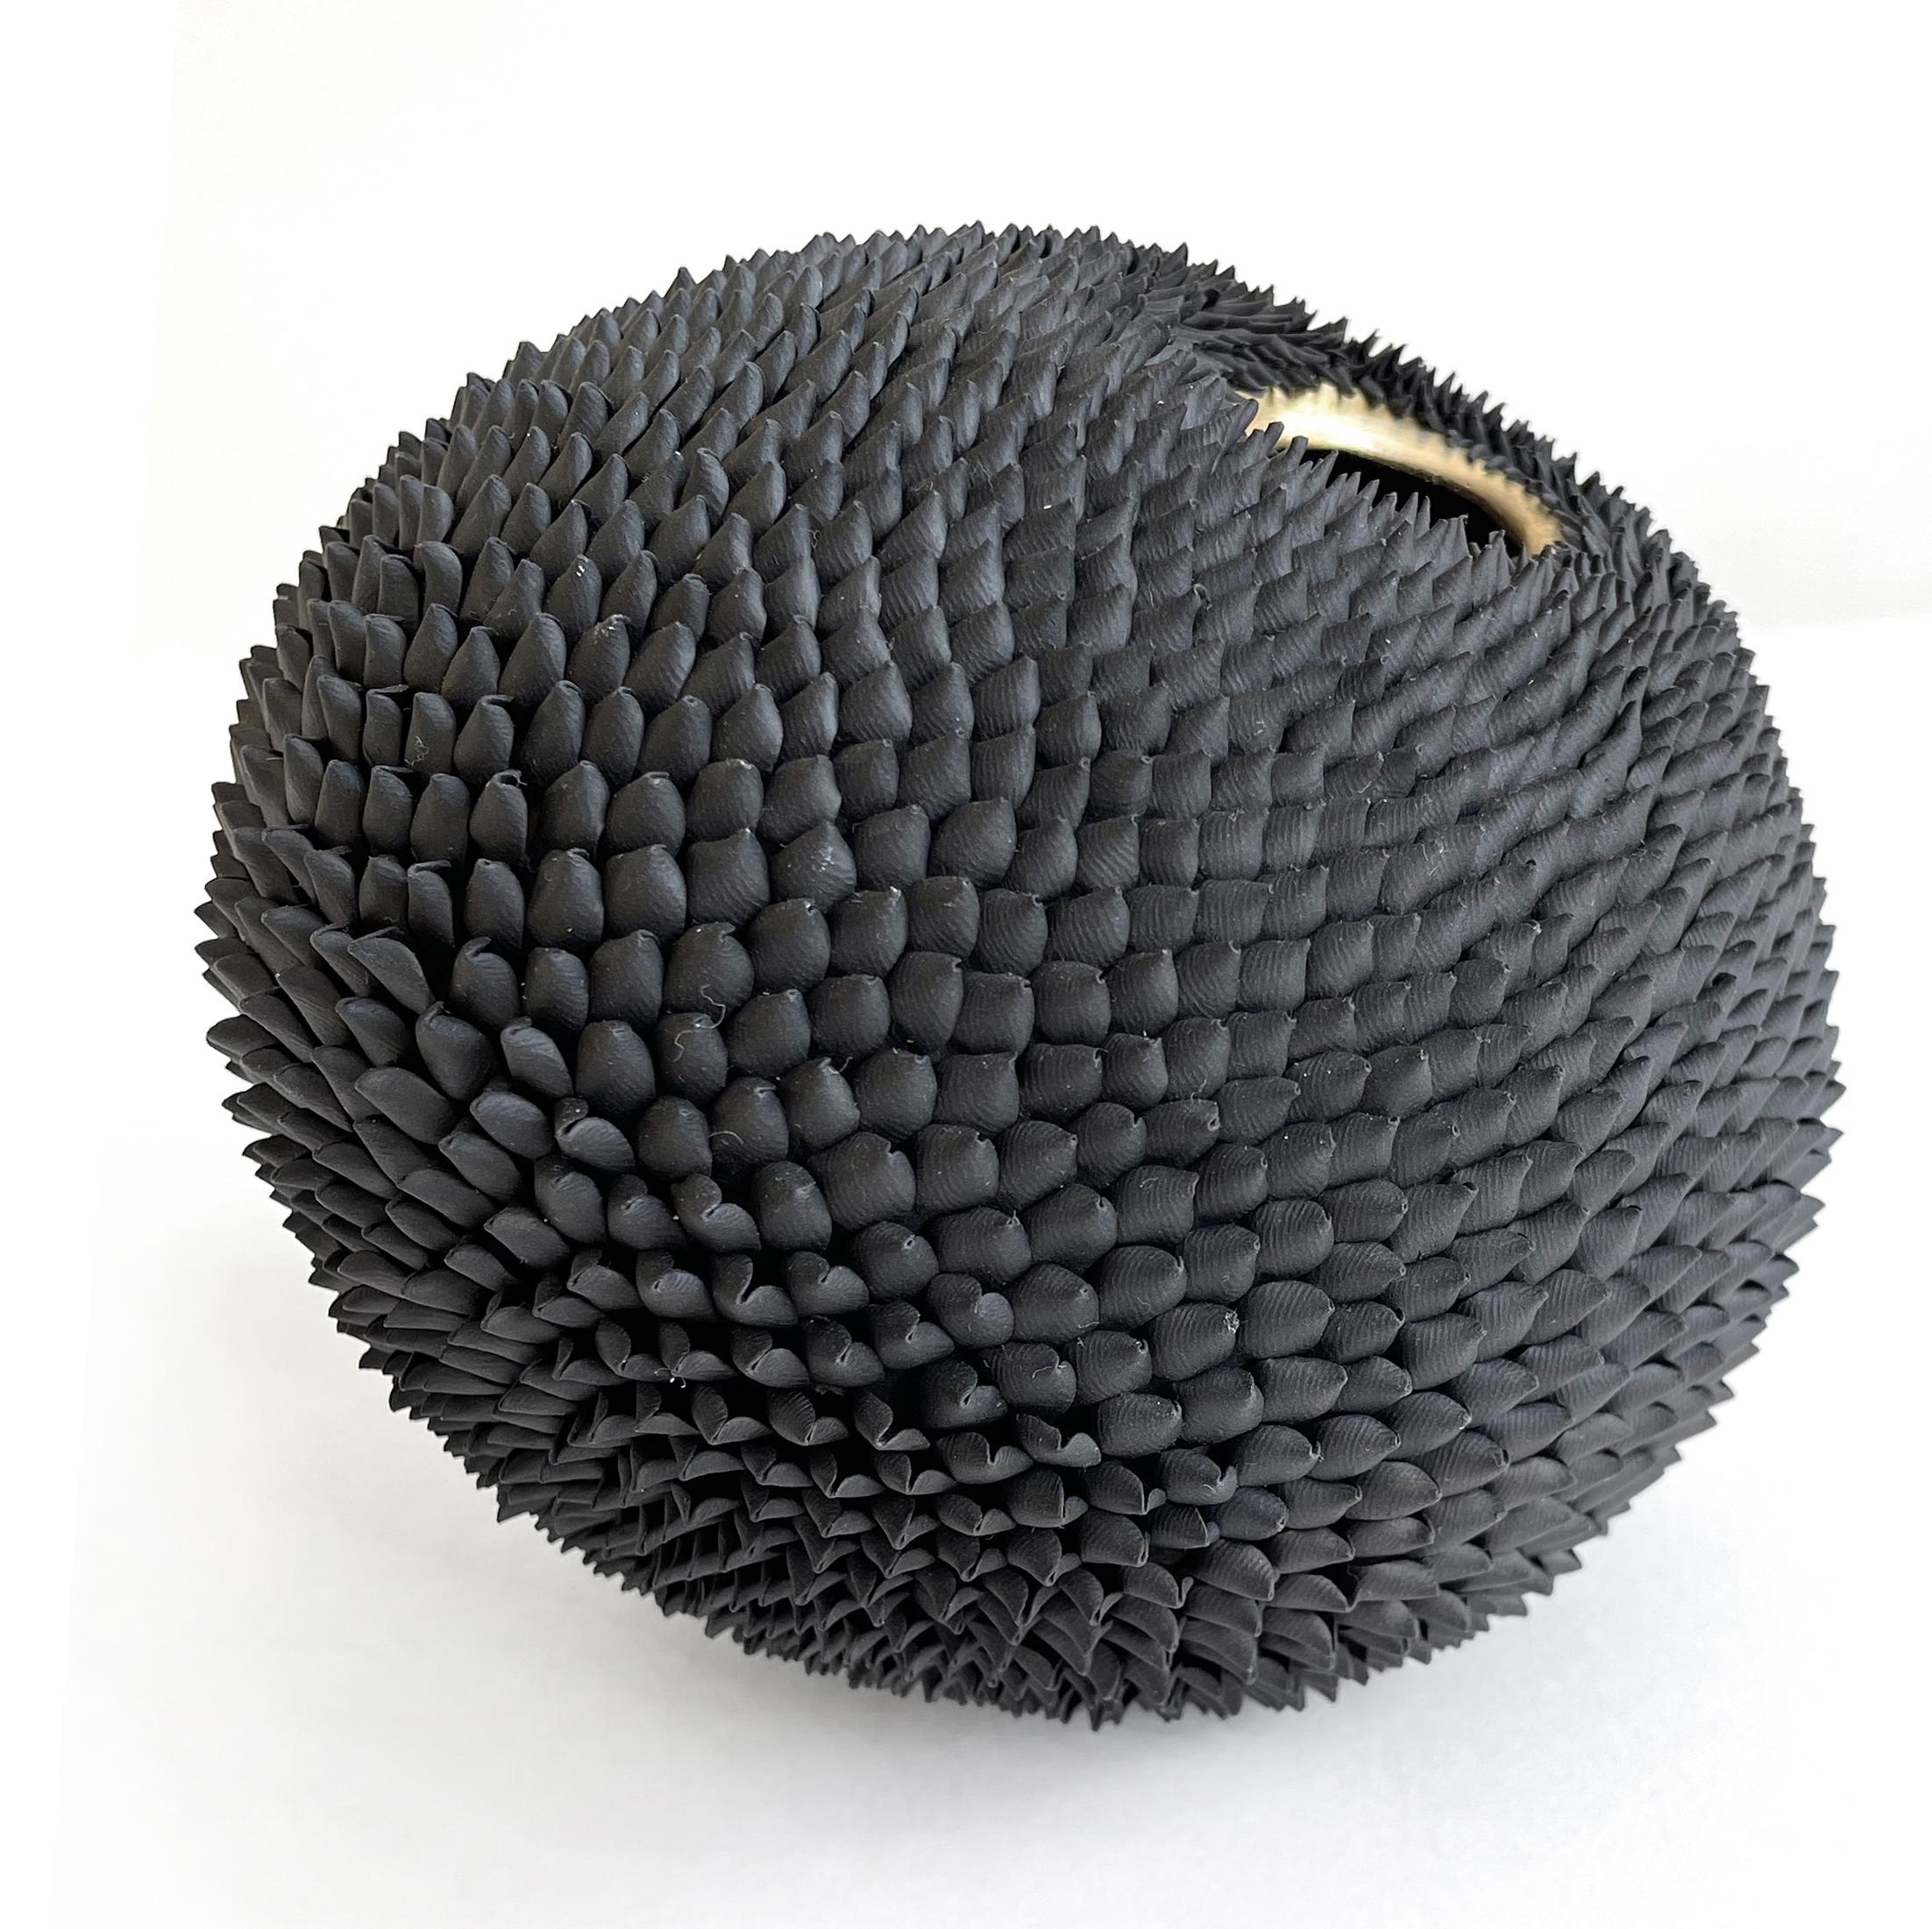 Mylinh Ngyen Abstract Sculpture - Black seed - small free standing sculpture with clay on brass